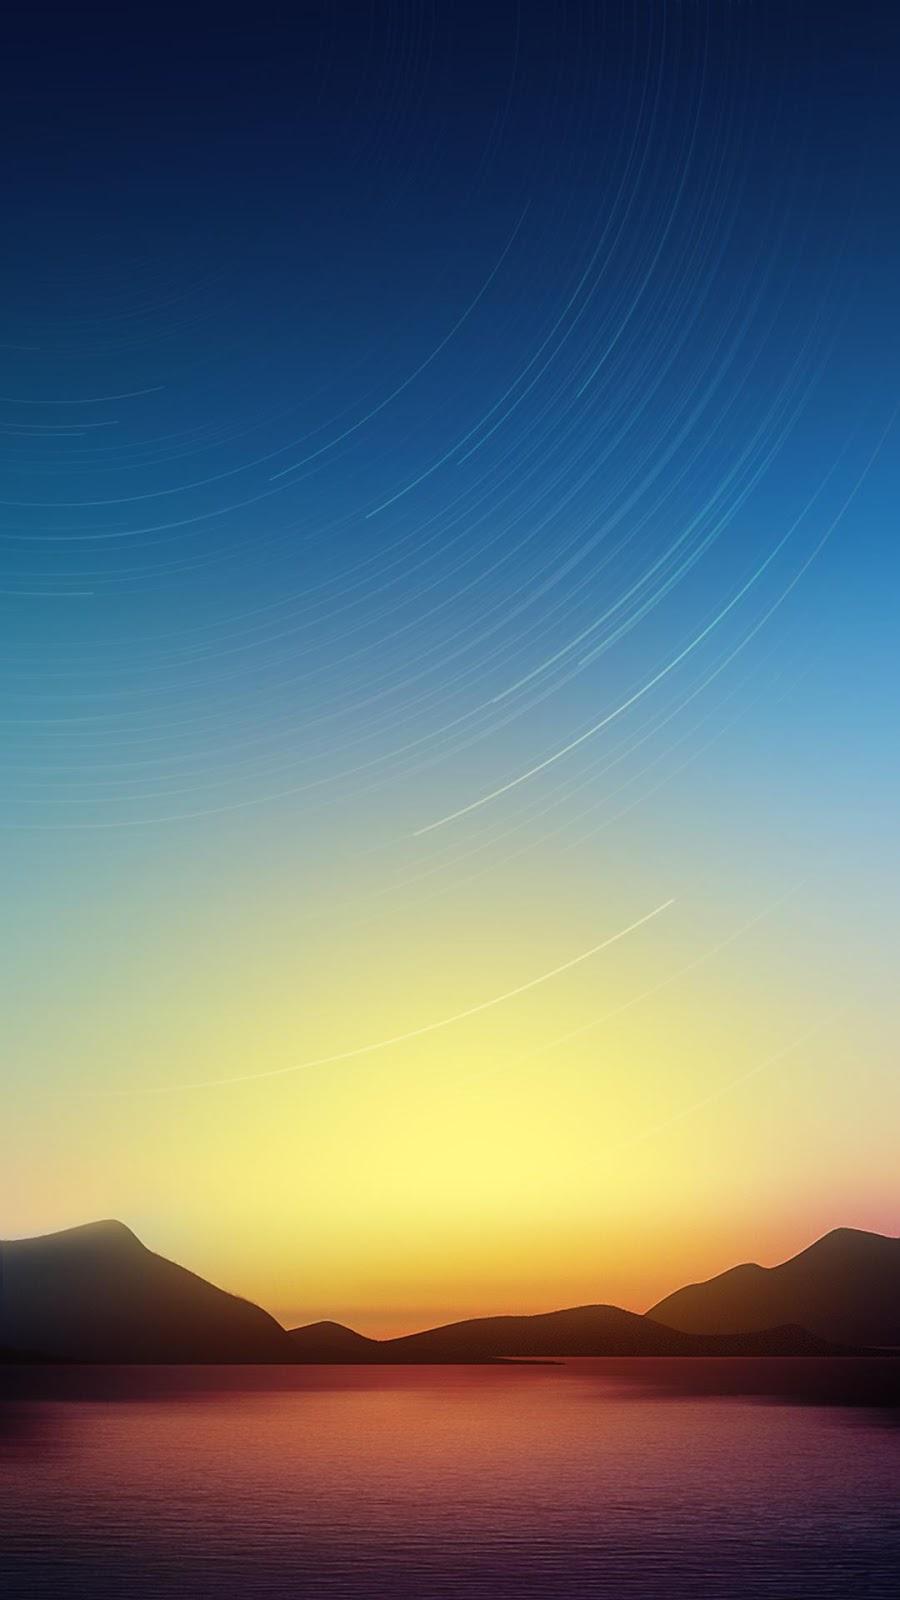 Free download Samsung J5 Wallpaper Full HD 57 Picture [900x1600] for your Desktop, Mobile & Tablet. Explore Samsung J5 Wallpaper. Samsung J5 Wallpaper, Samsung Galaxy J5 Prime Wallpaper, Samsung Wallpaper